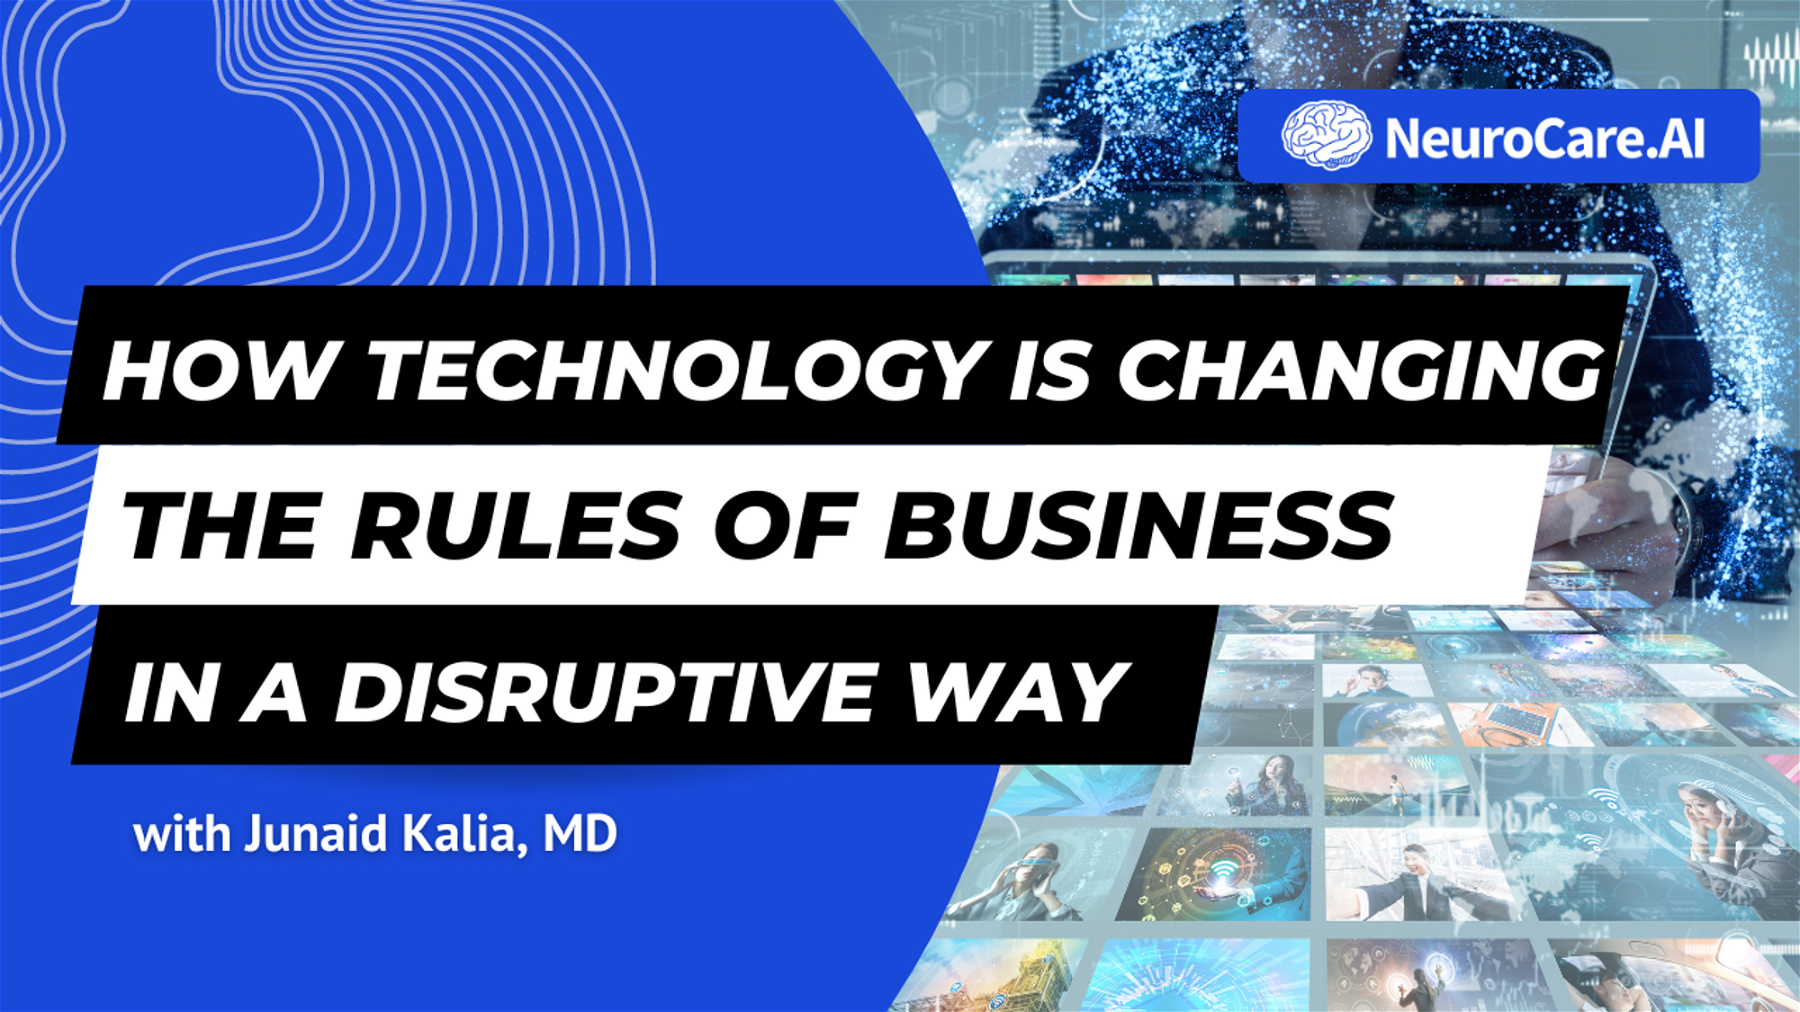 How Technology Is Changing the Rules of Business in a Disruptive Way